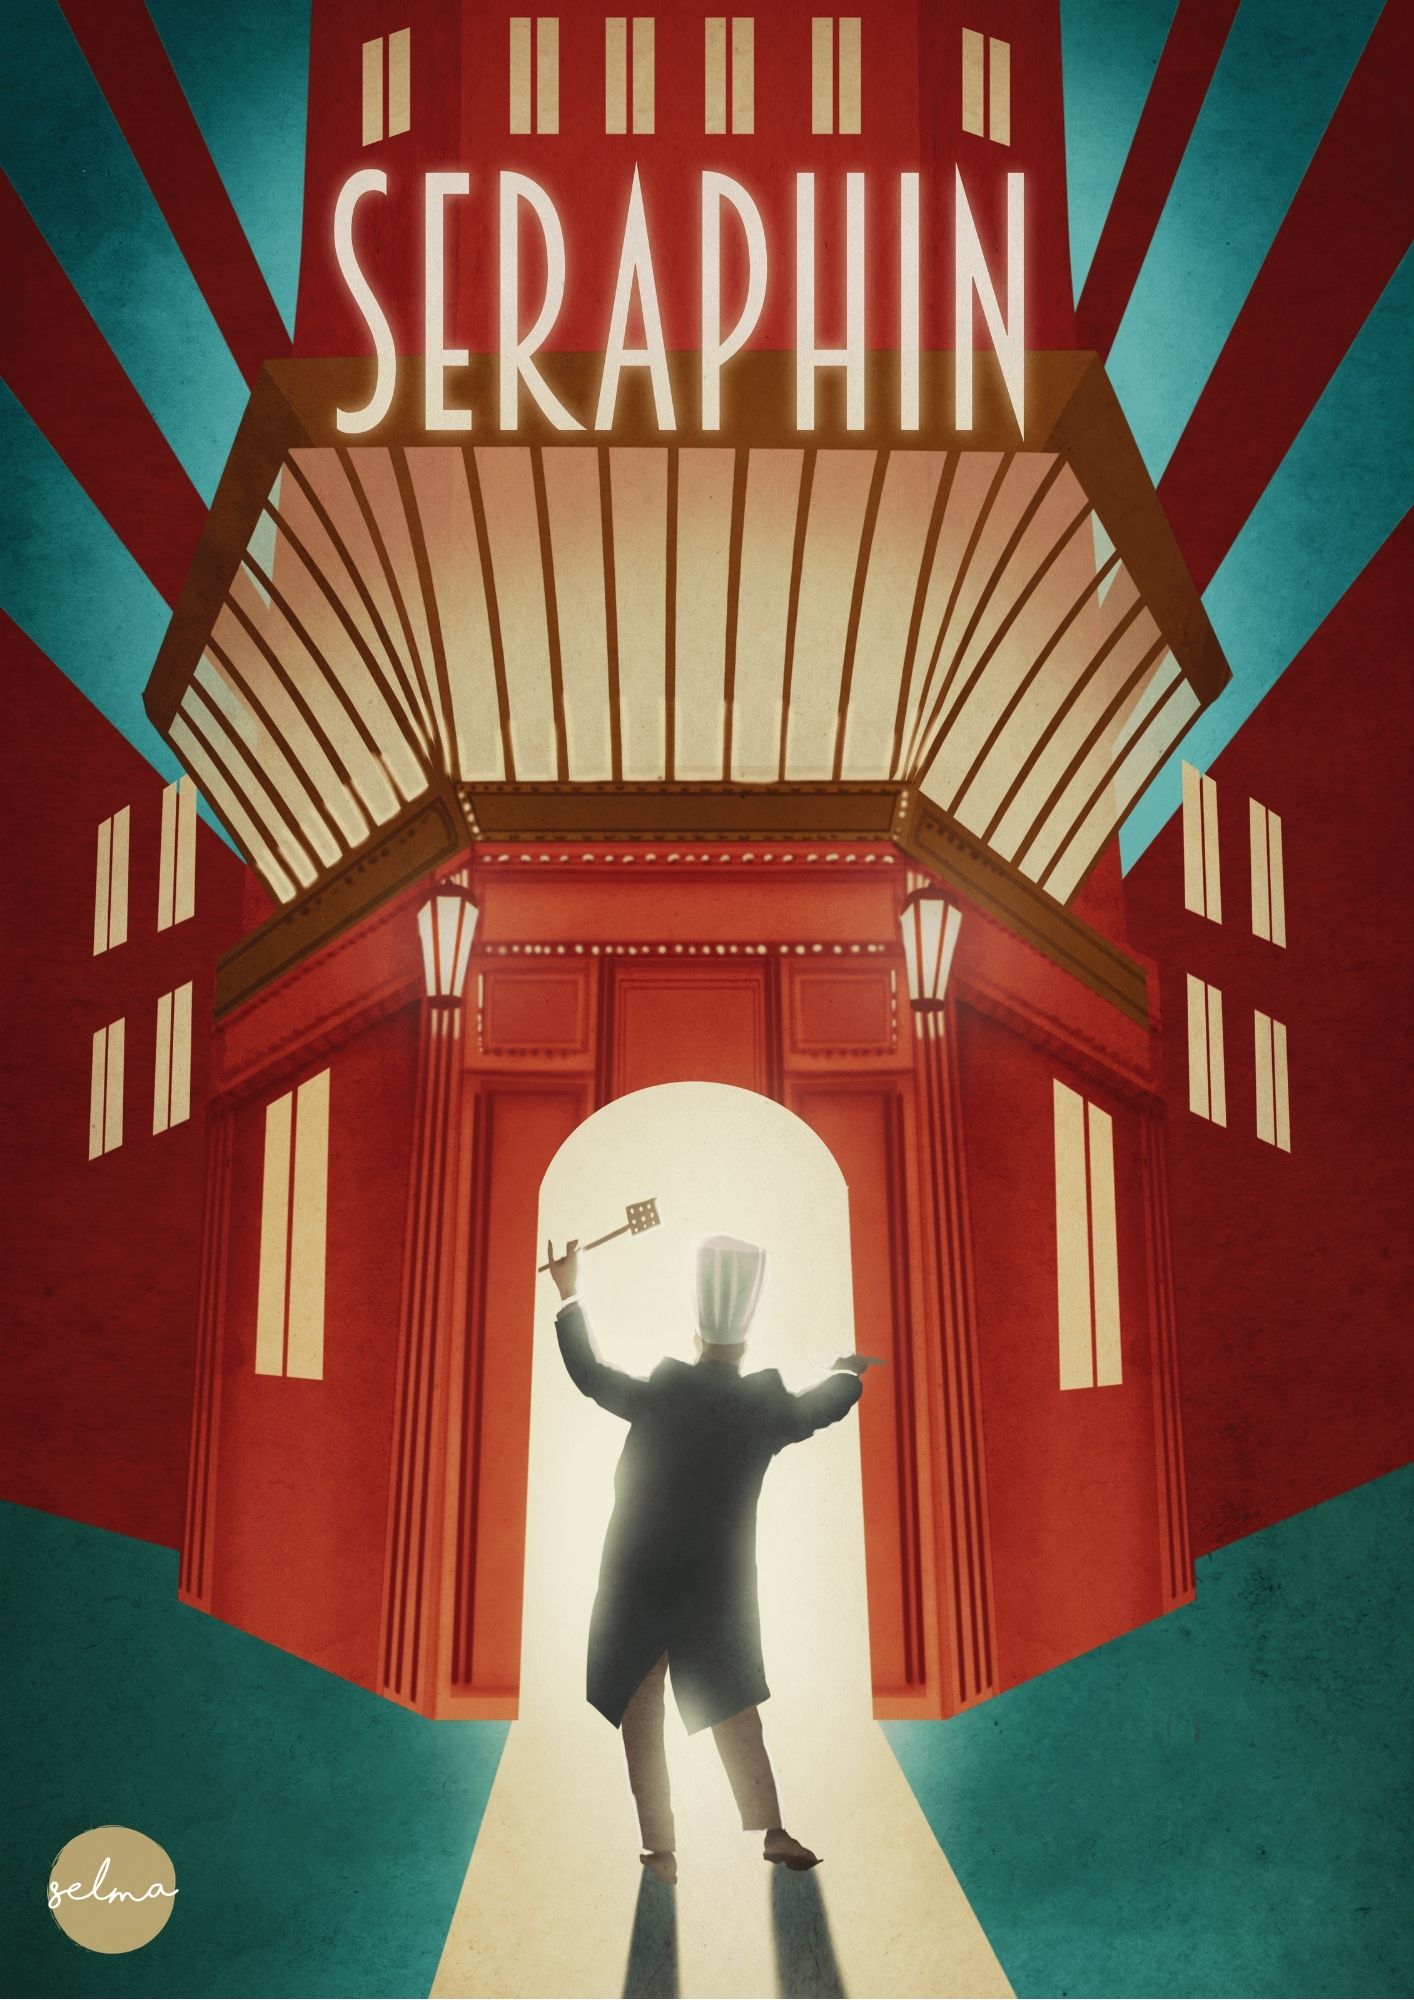 Séraphin, the musical from the company Selma